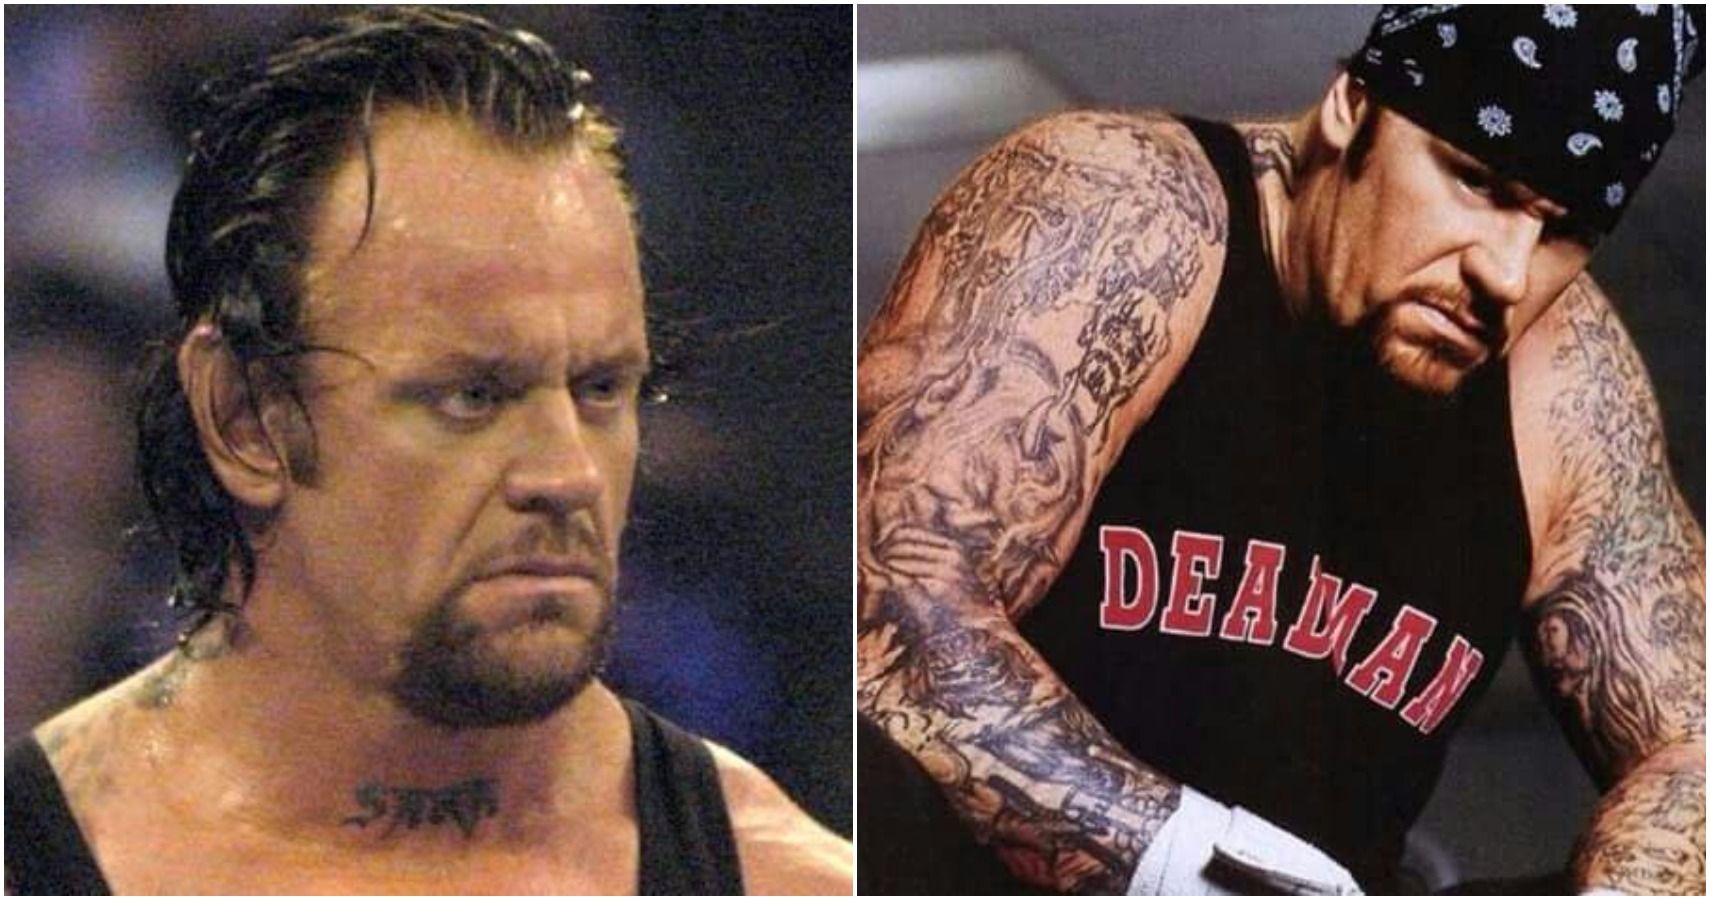 10 Facts You Need To Know About The Undertaker's Tattoos